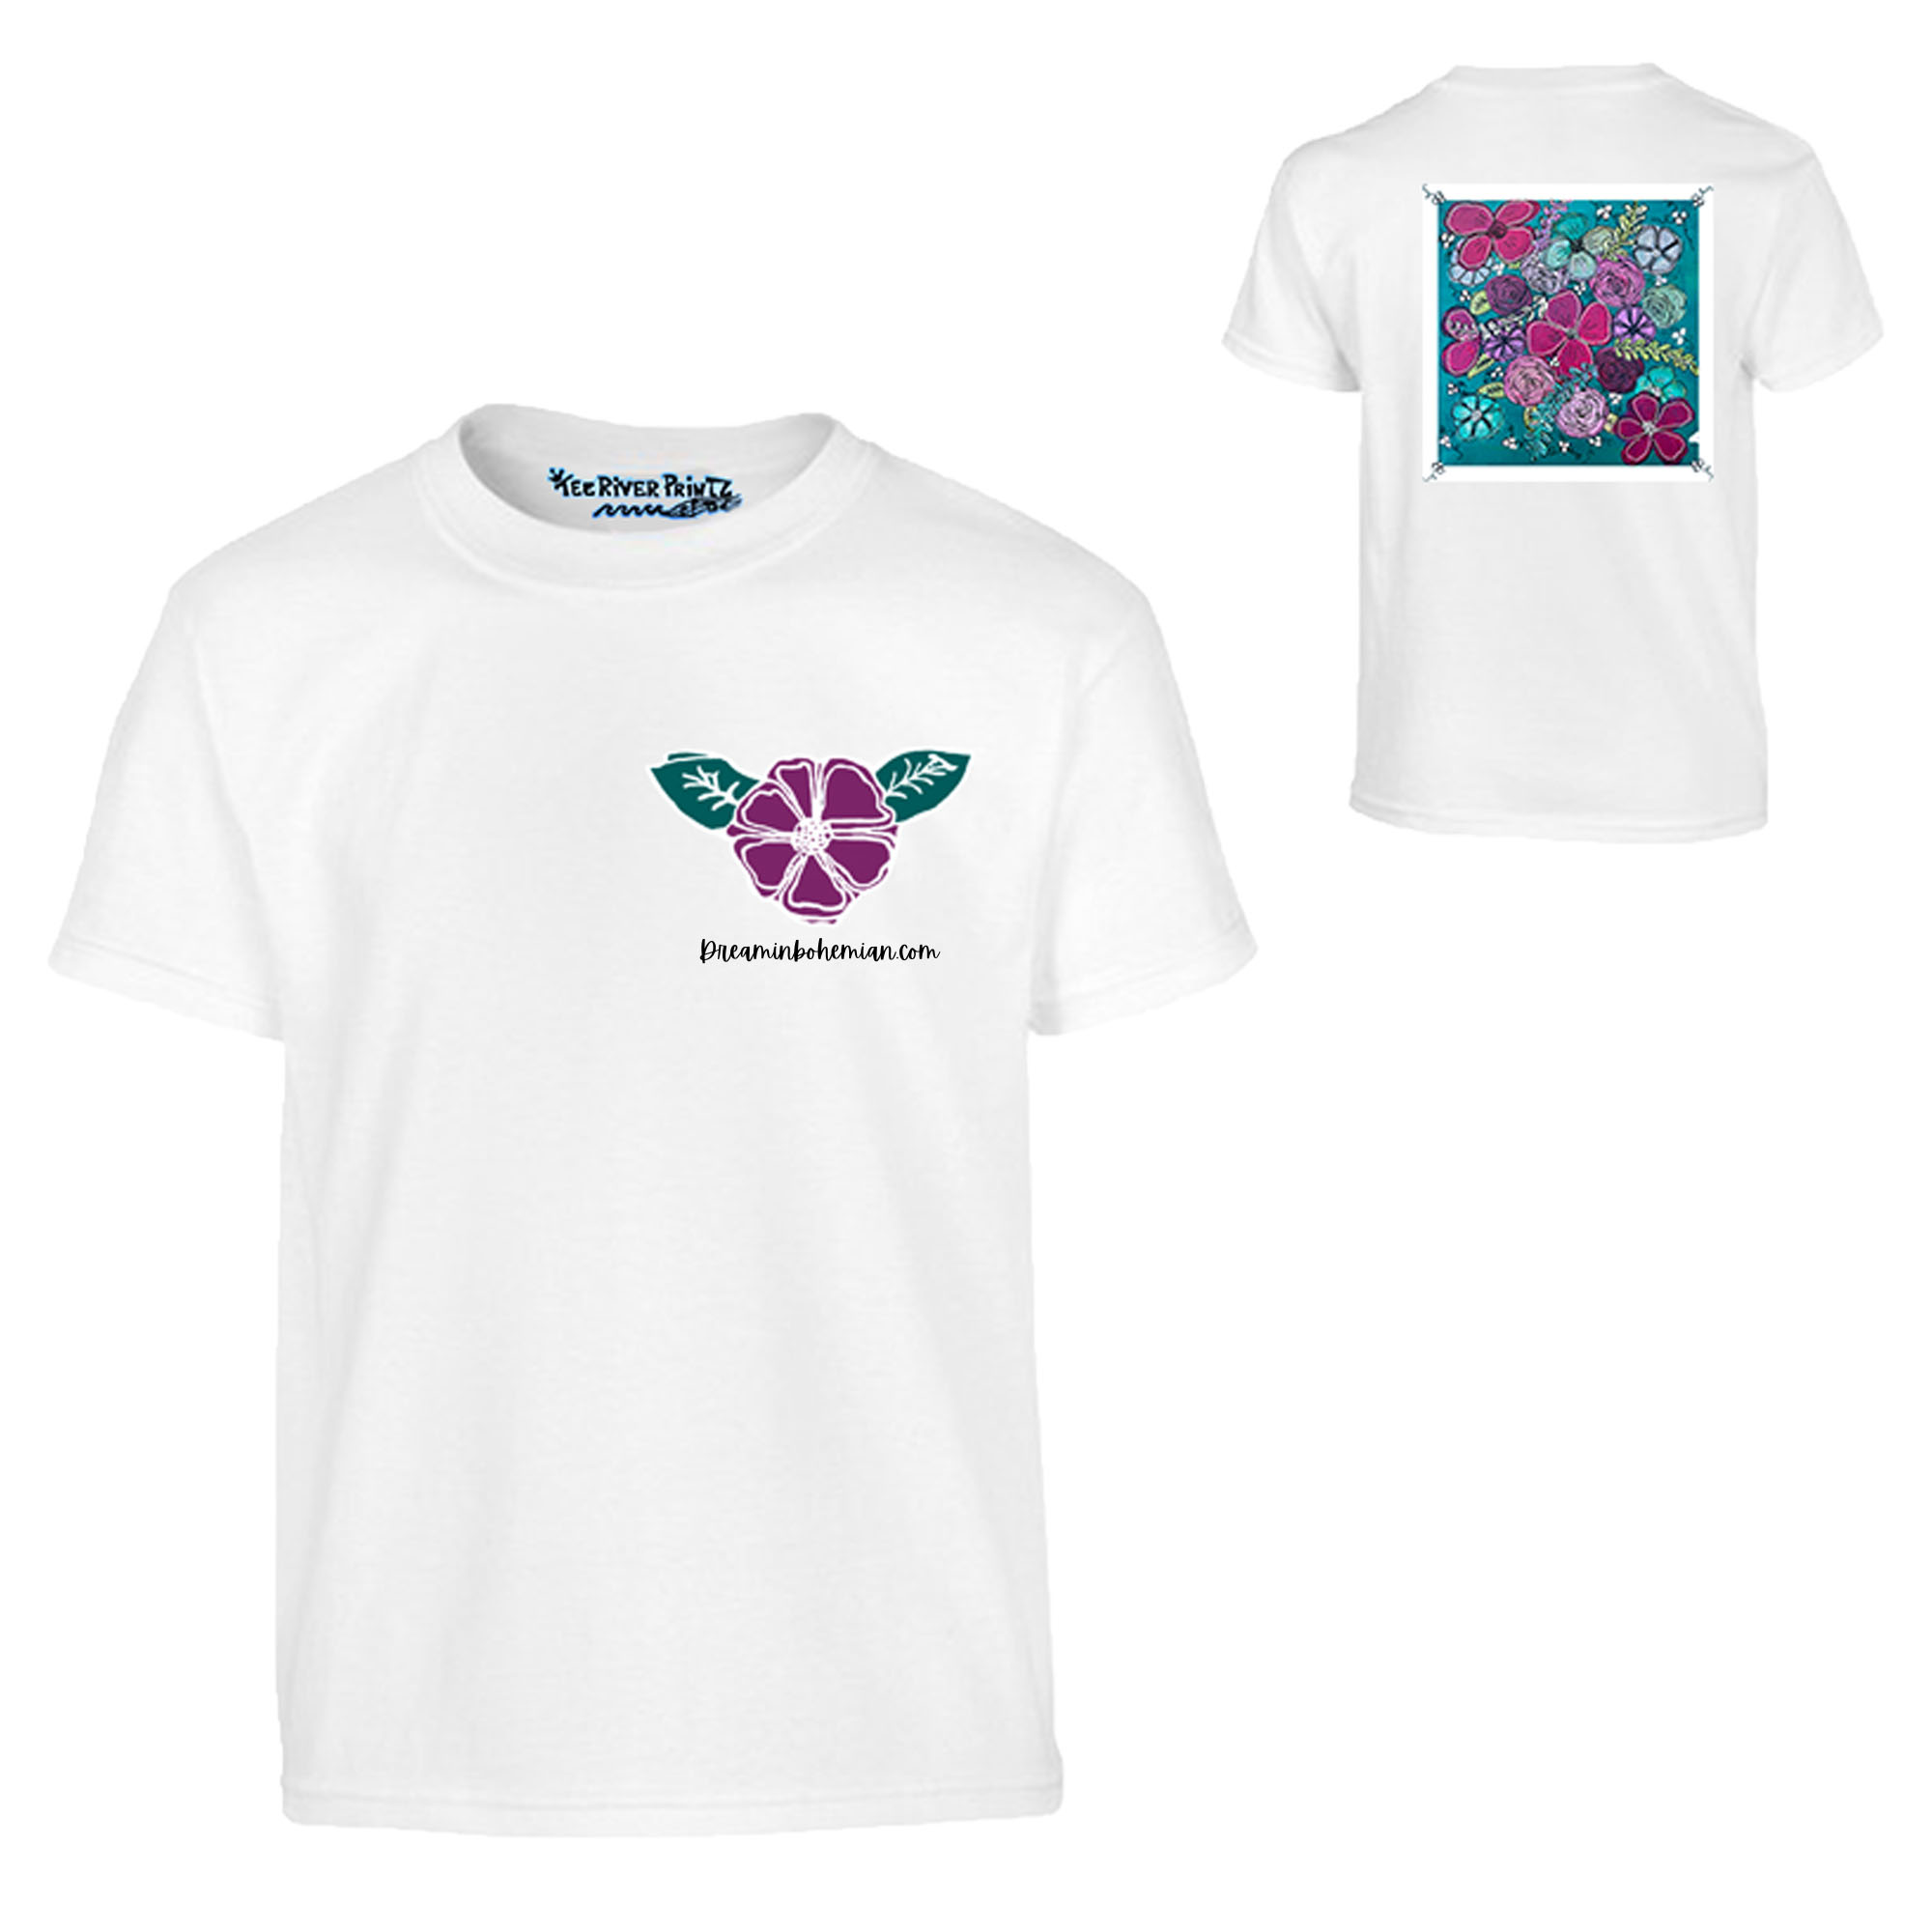 White t shirt with dark teal floral painting printed on it